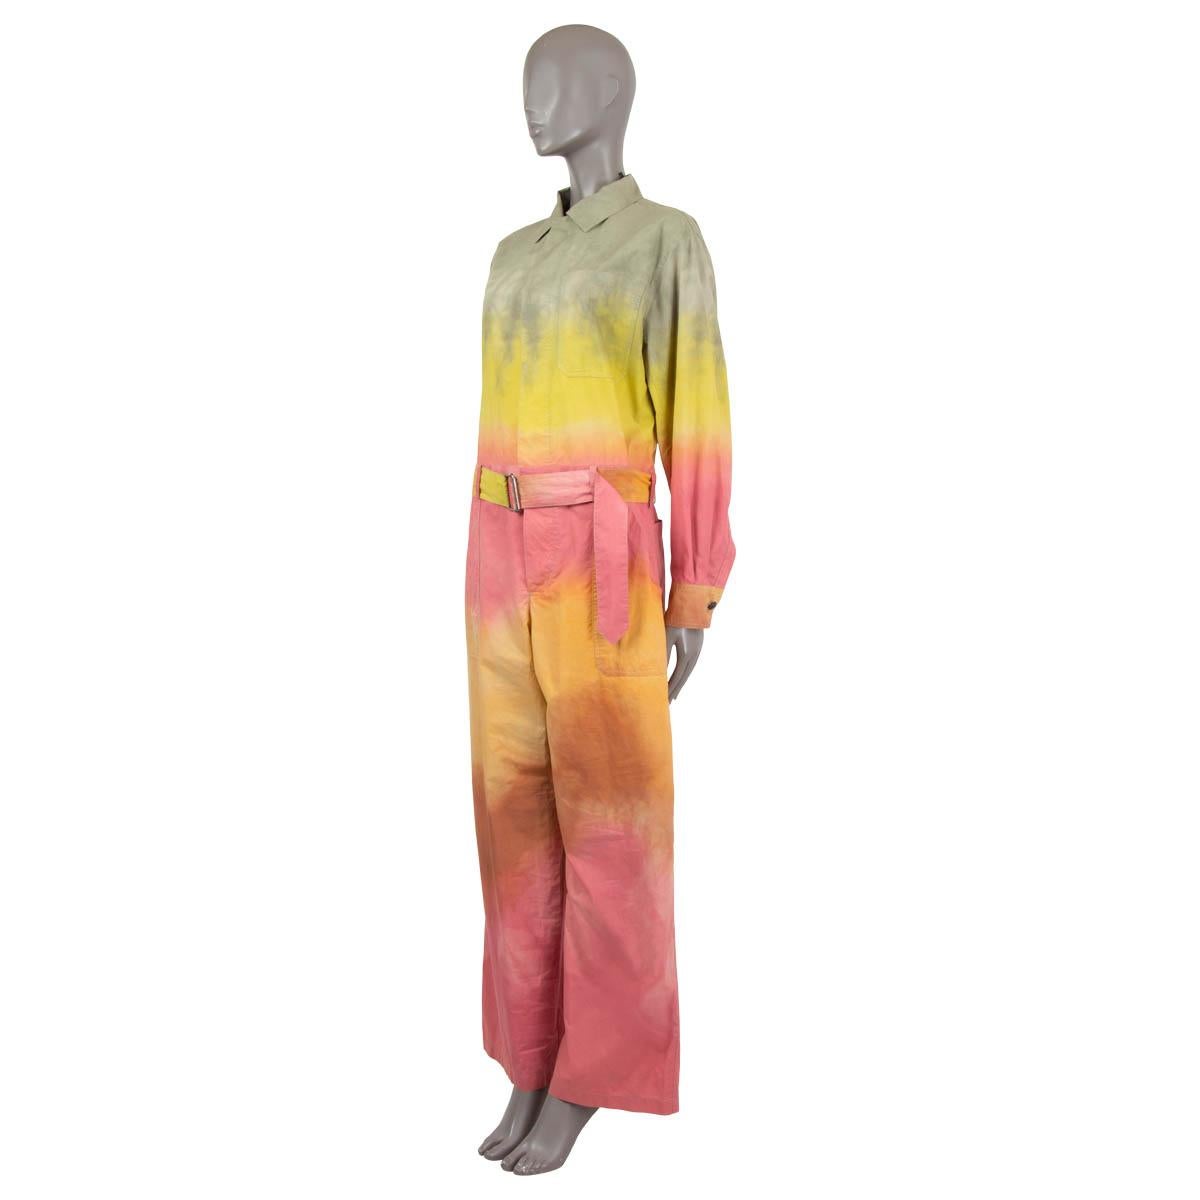 100% authentic Christian Dior DiorAura belted jumpsuit in multicolor ombre cotton (100%). Featrues a chest pocket, two slant pockets, bee embroidery and a relaxed fit. Opens with buttons on the front and is unlined. Has been worn and is in excellent